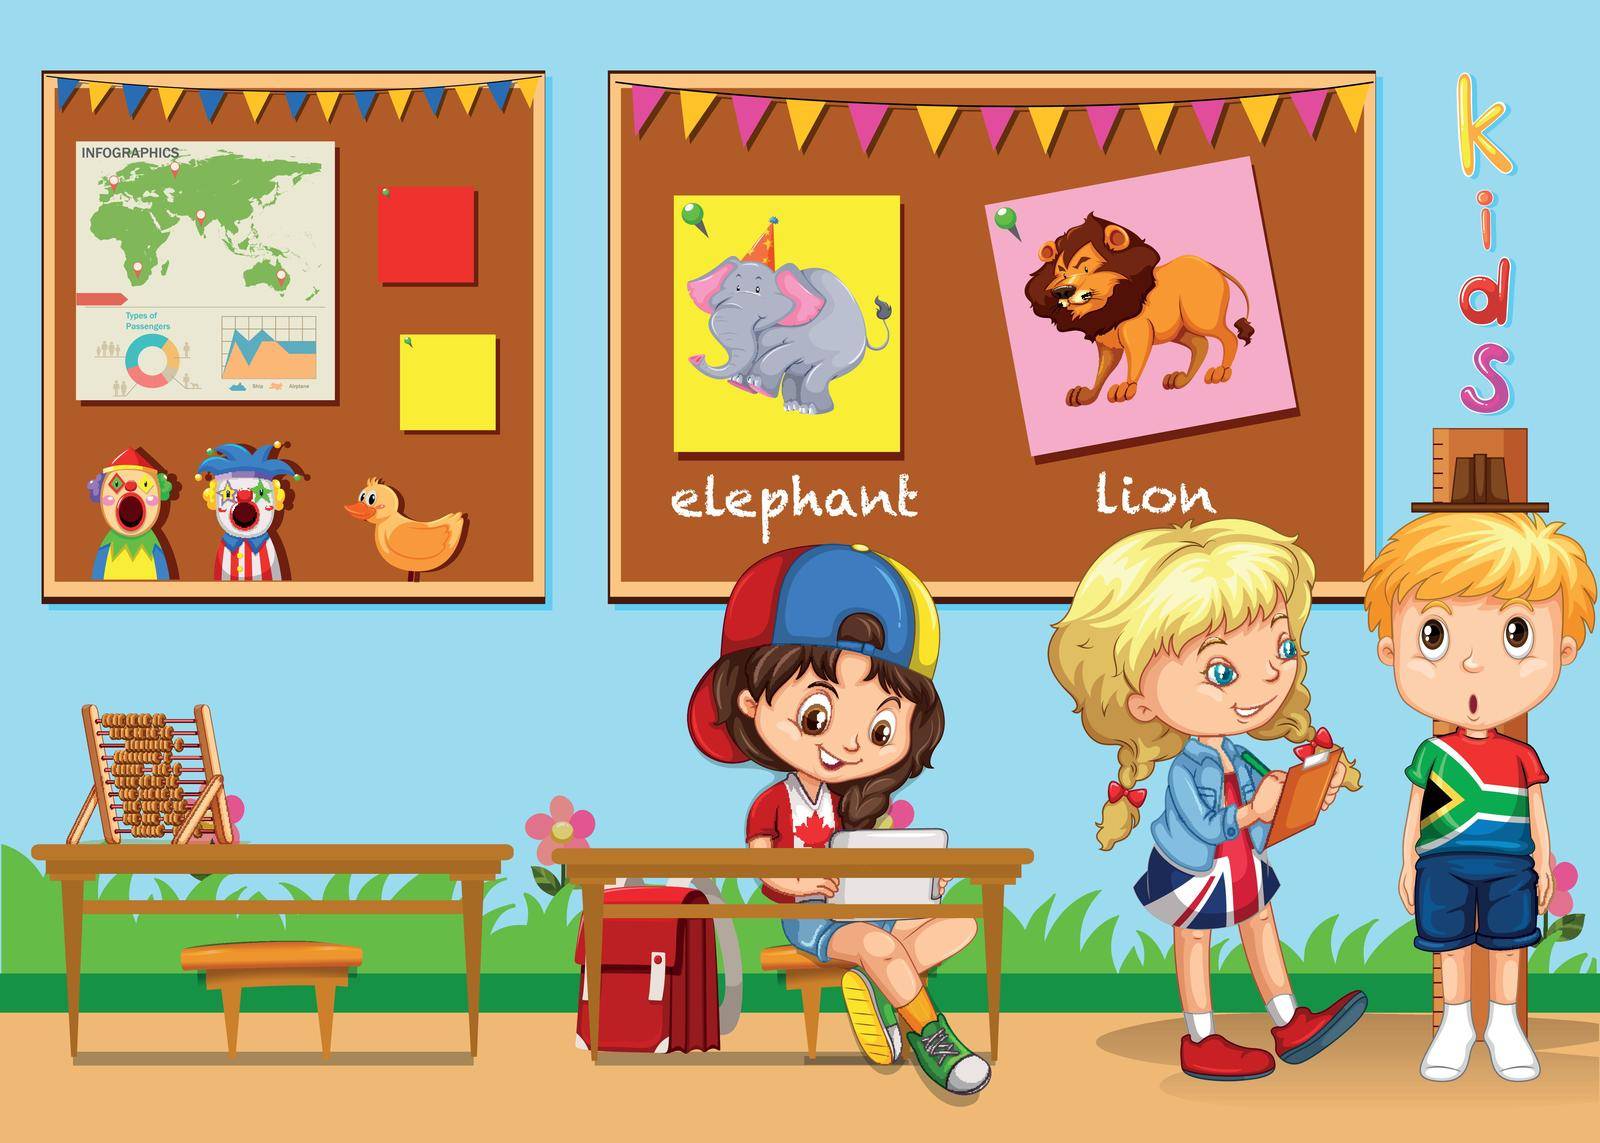 Children learning in the classroom illustration